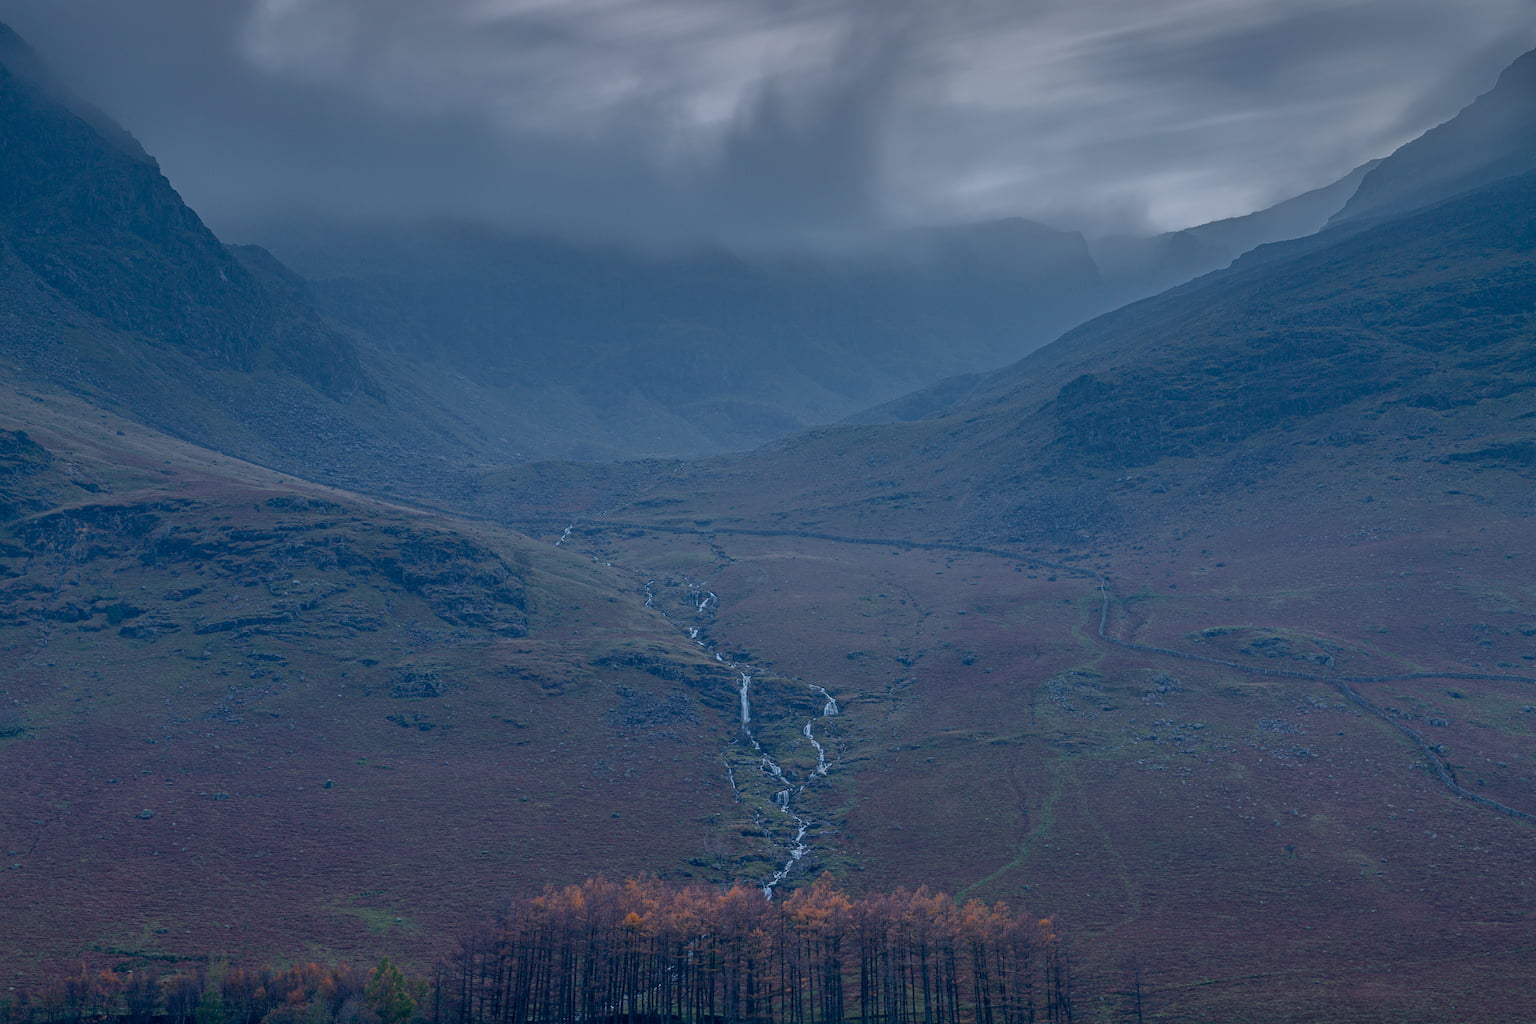 A very dark and wet day over Burtness comb in Buttermere, Lake Districk. Landscape photograph taken from across Buttermere lake. 